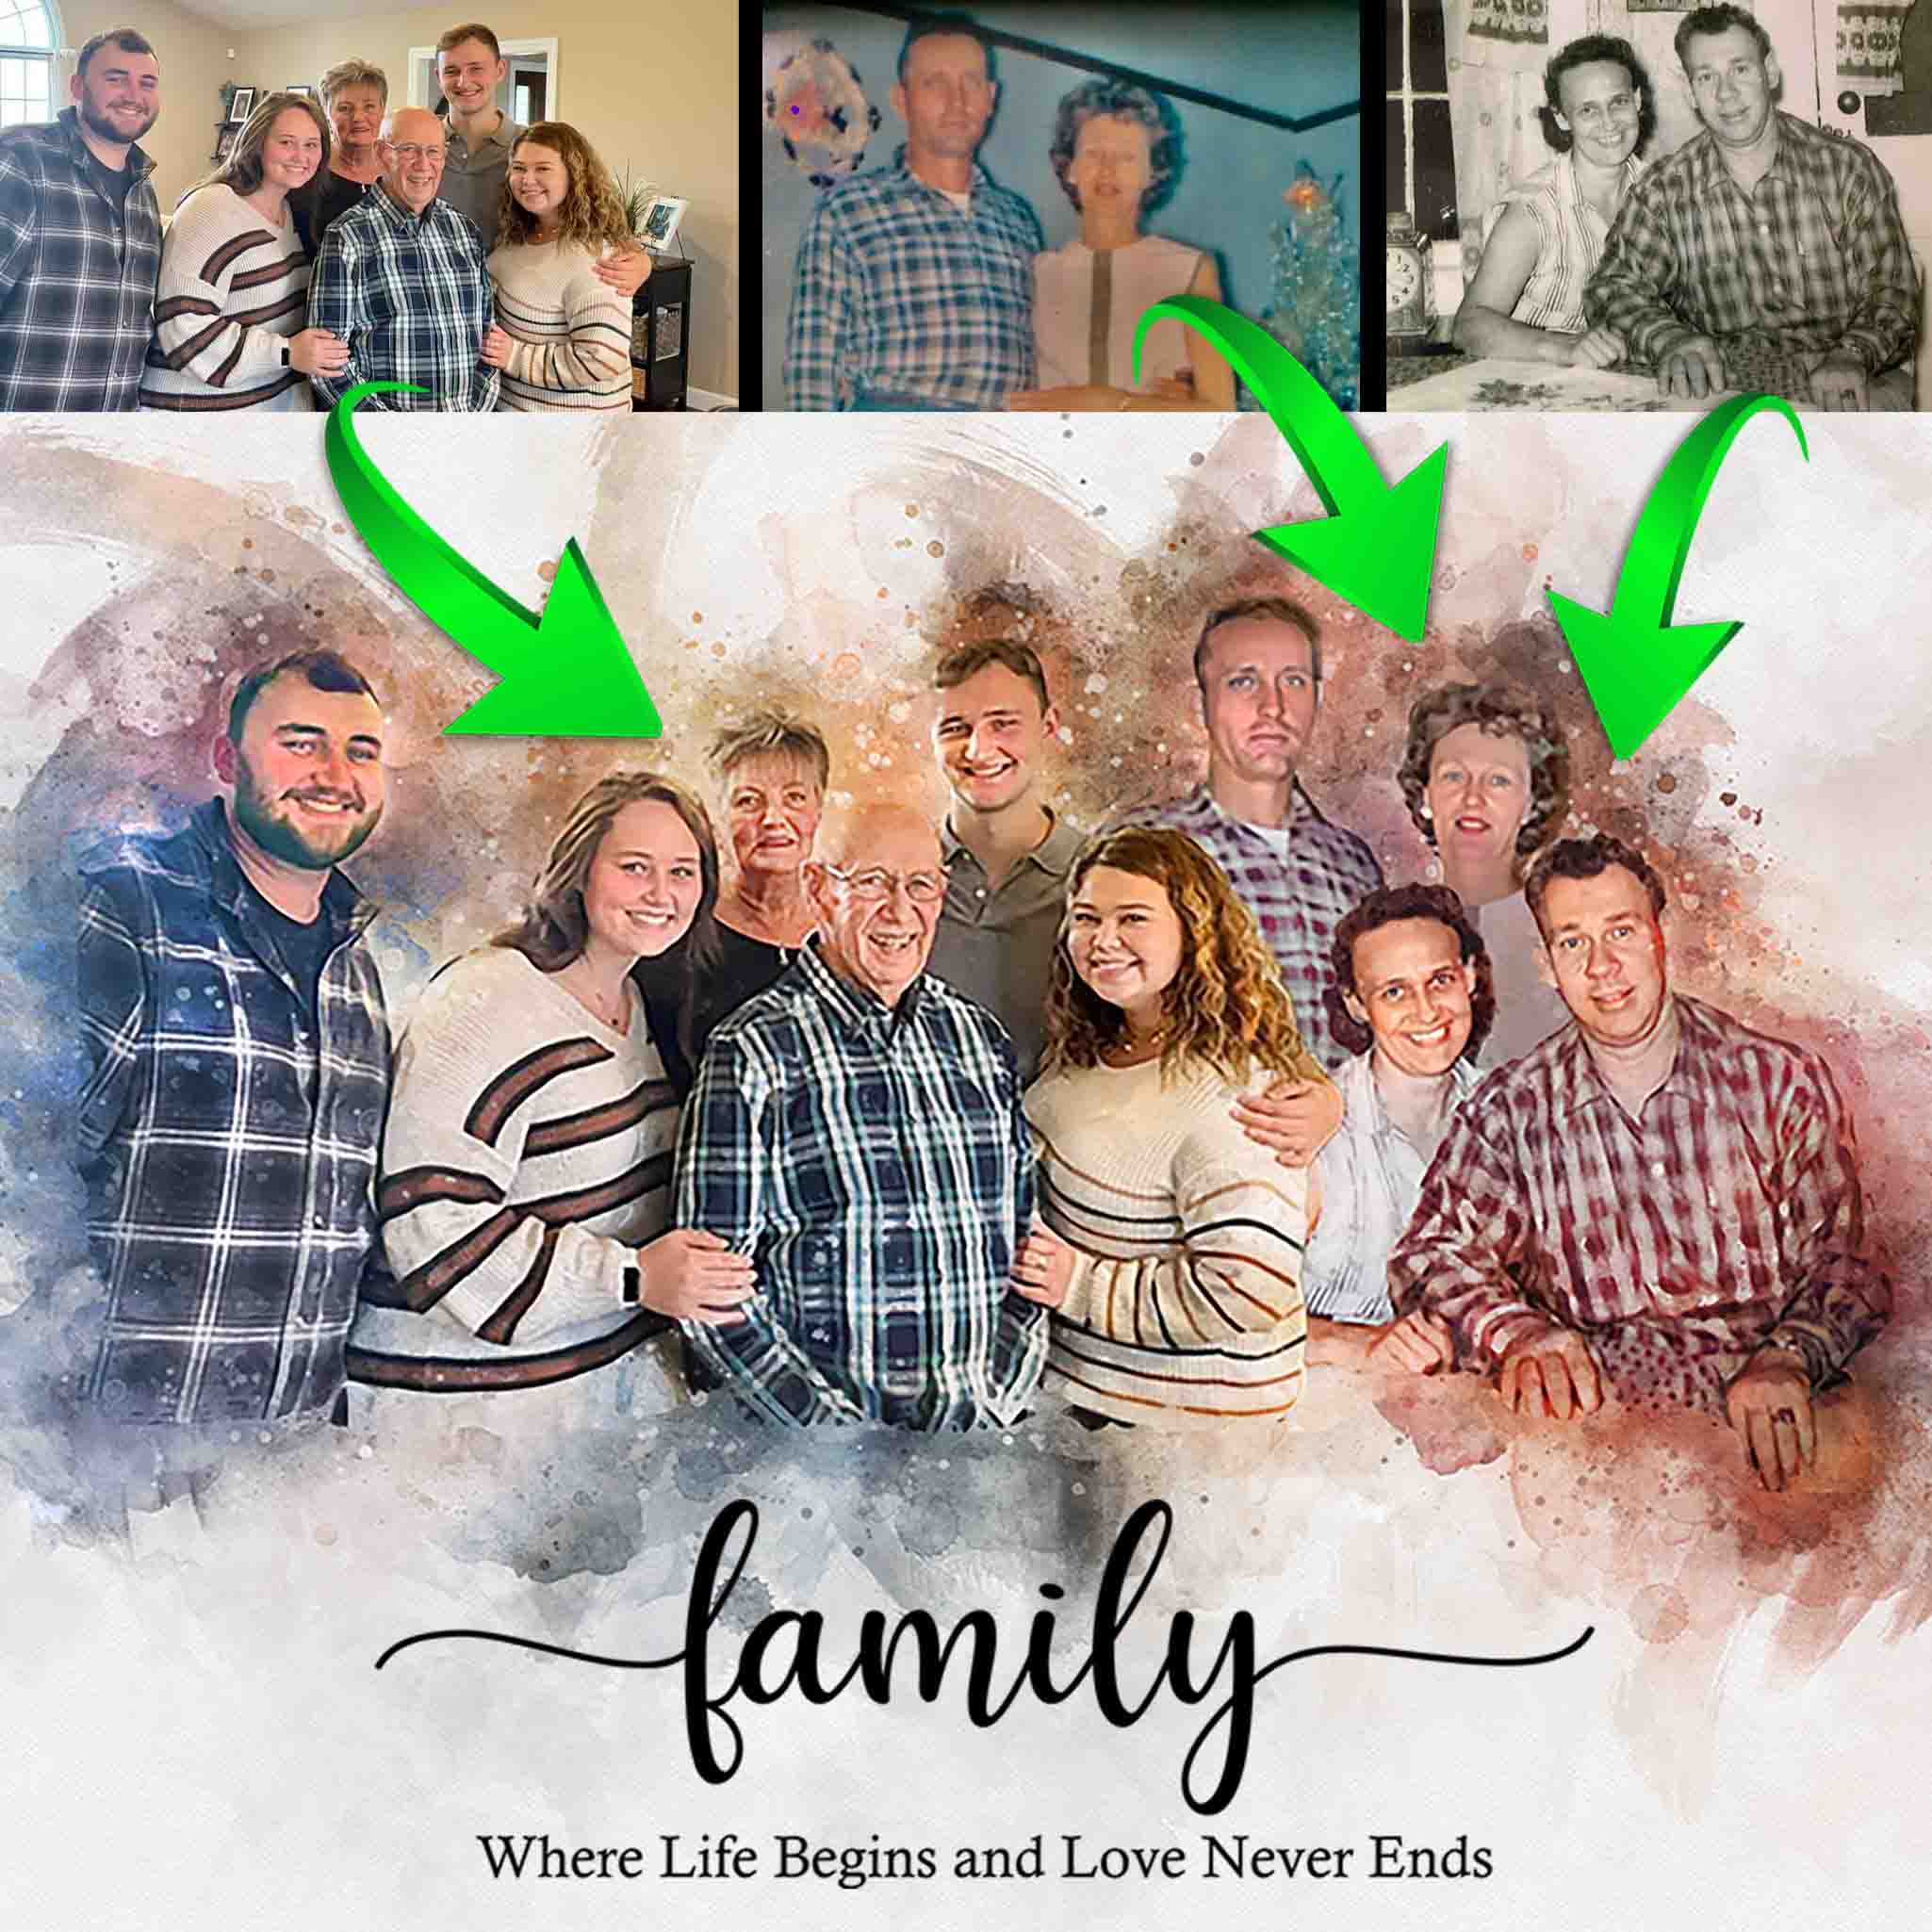 Gift Ideas for Those Who Have Lost a Loved One - Add a Loved One to a Photo, Create Portraits from Multiple Generations, Transform Family Photos into Beautiful Paintings, Capture Your Family's Essence with a Family Portrait - FromPicToArt